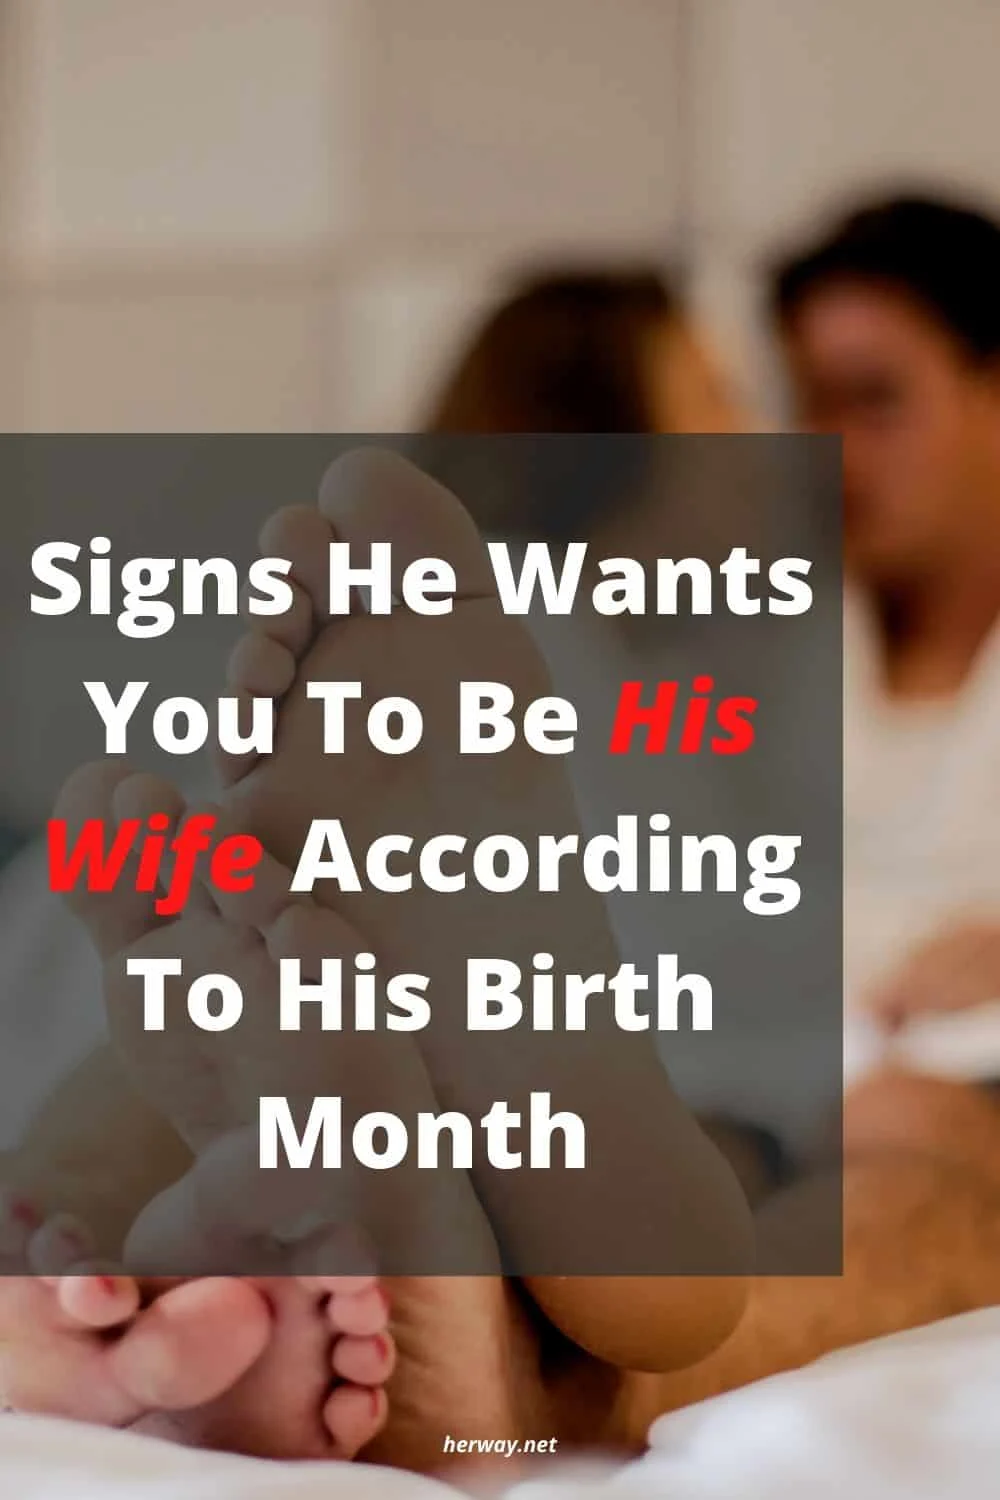 Signs He Wants You To Be His Wife According To His Birth Month